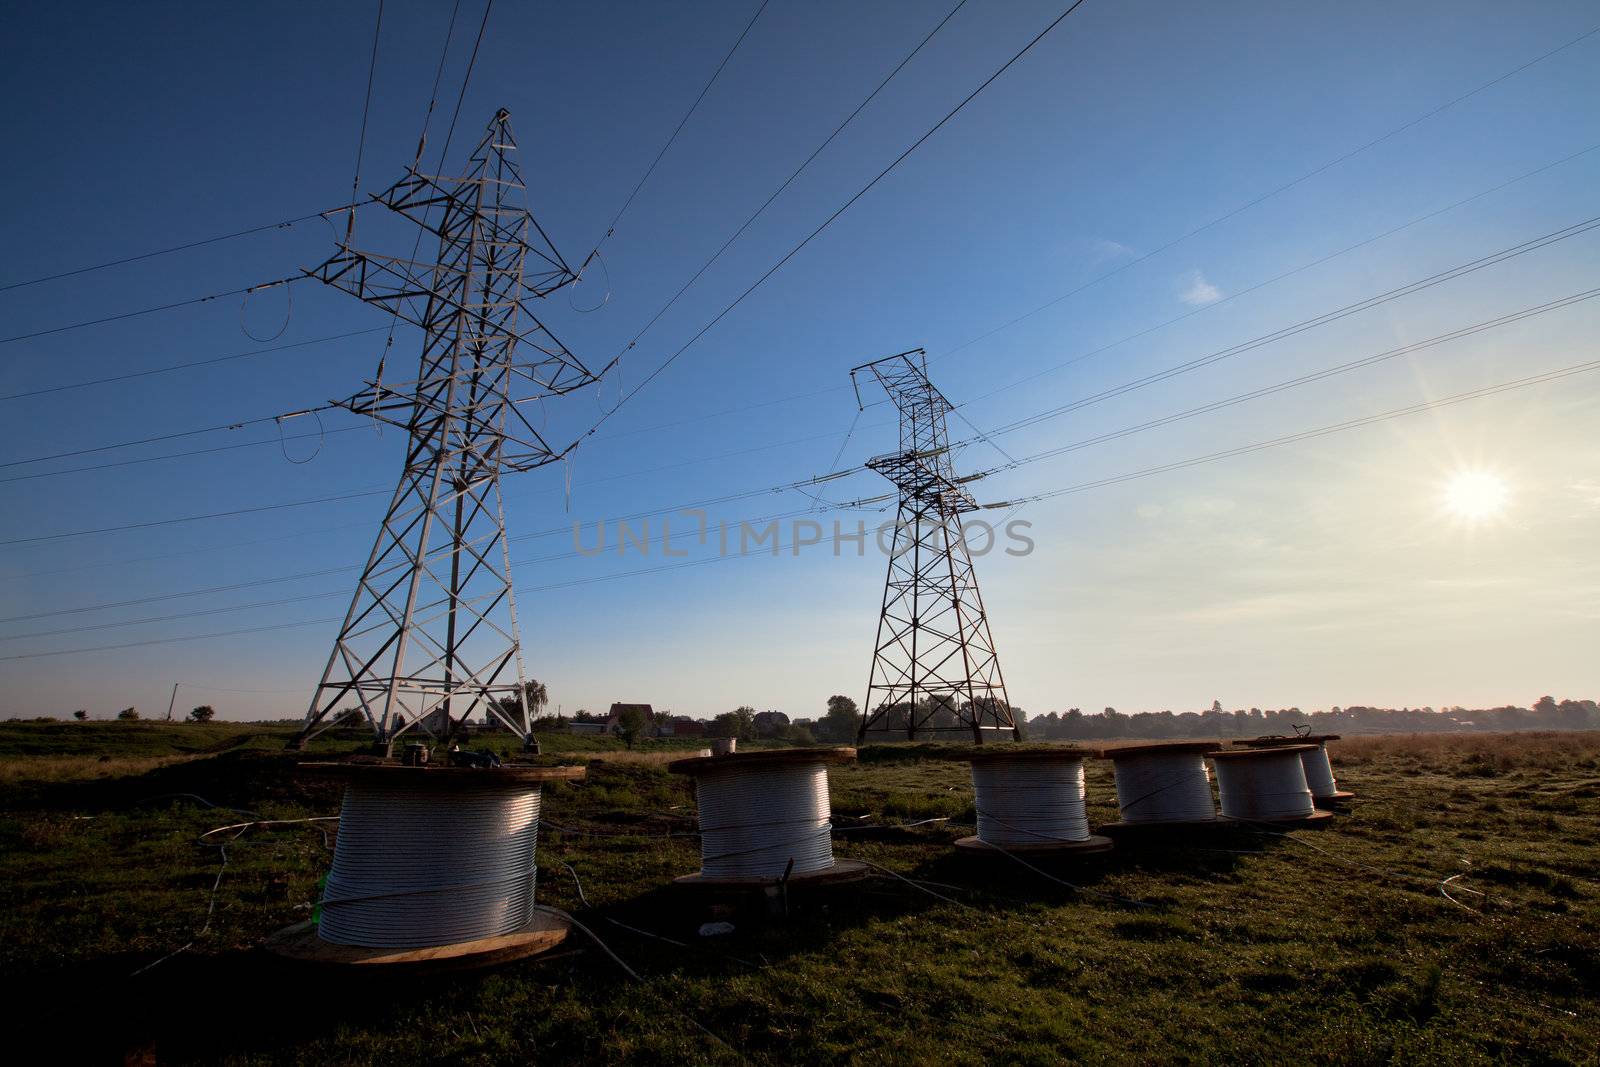 A power line tower in the field and six bobbins with aluminum wire ready to installation